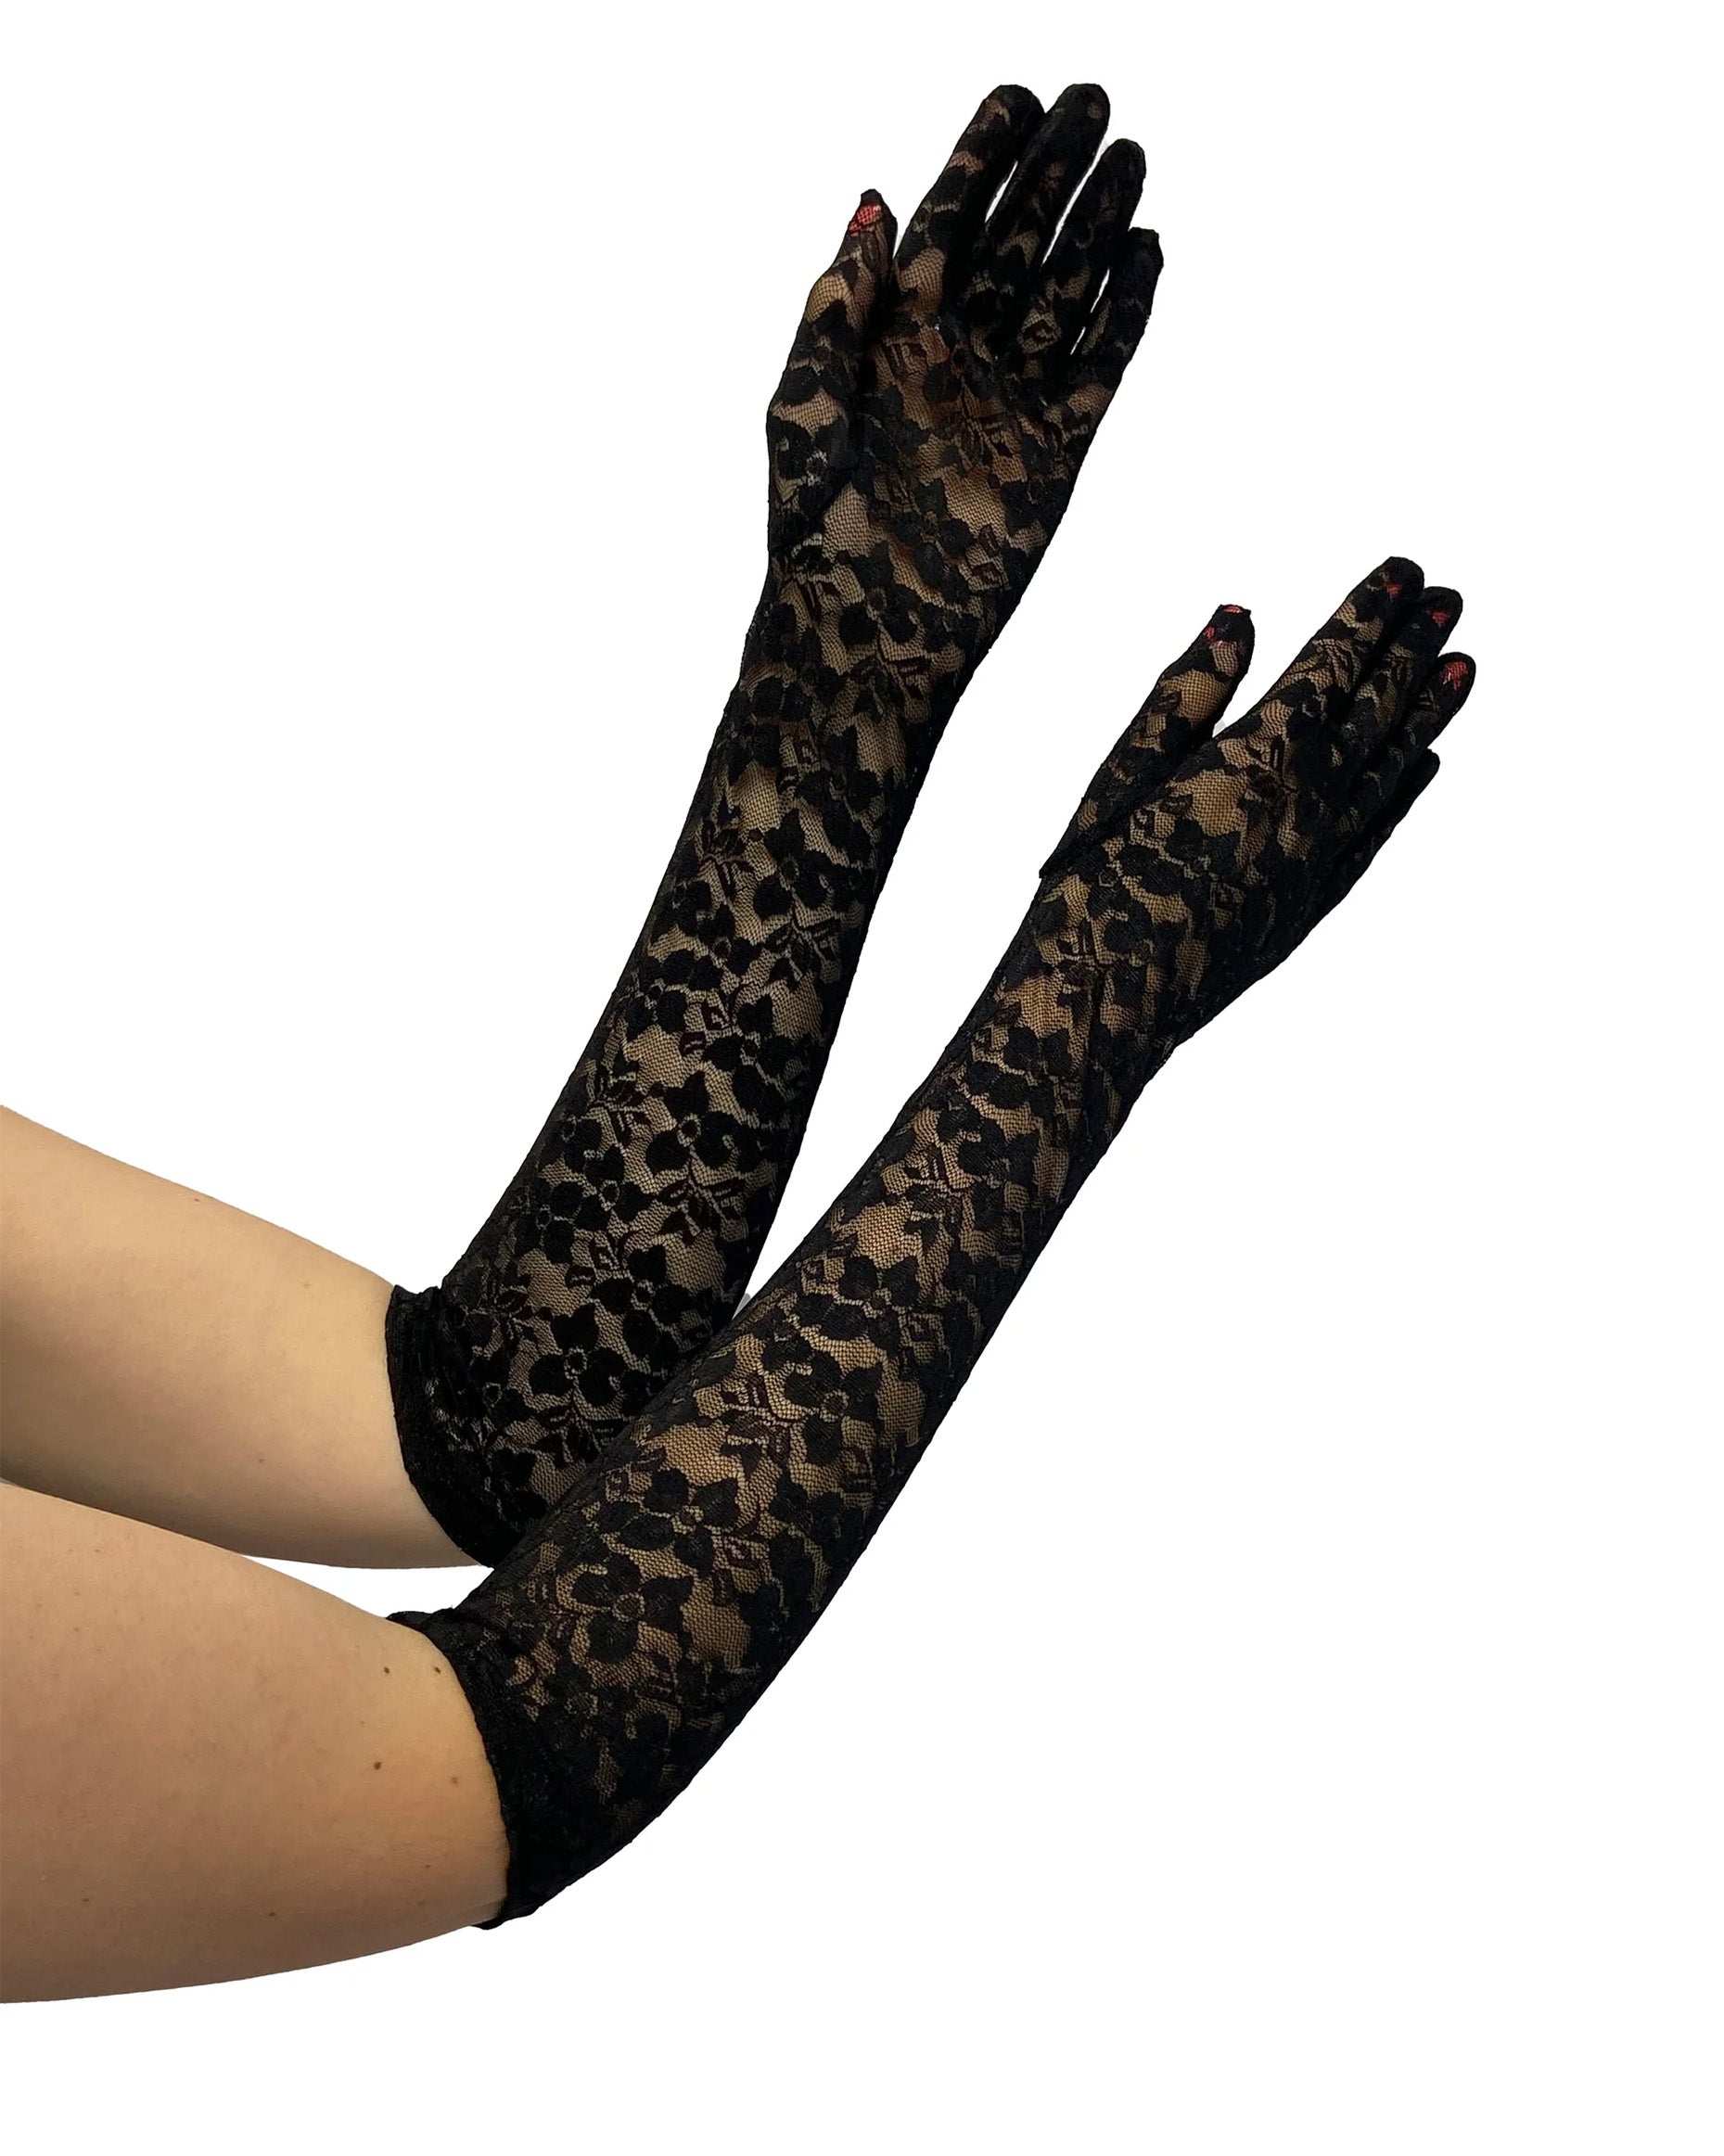 Pamela Mann Opera Lace Gloves - Black floral lace long over the elbow gloves.